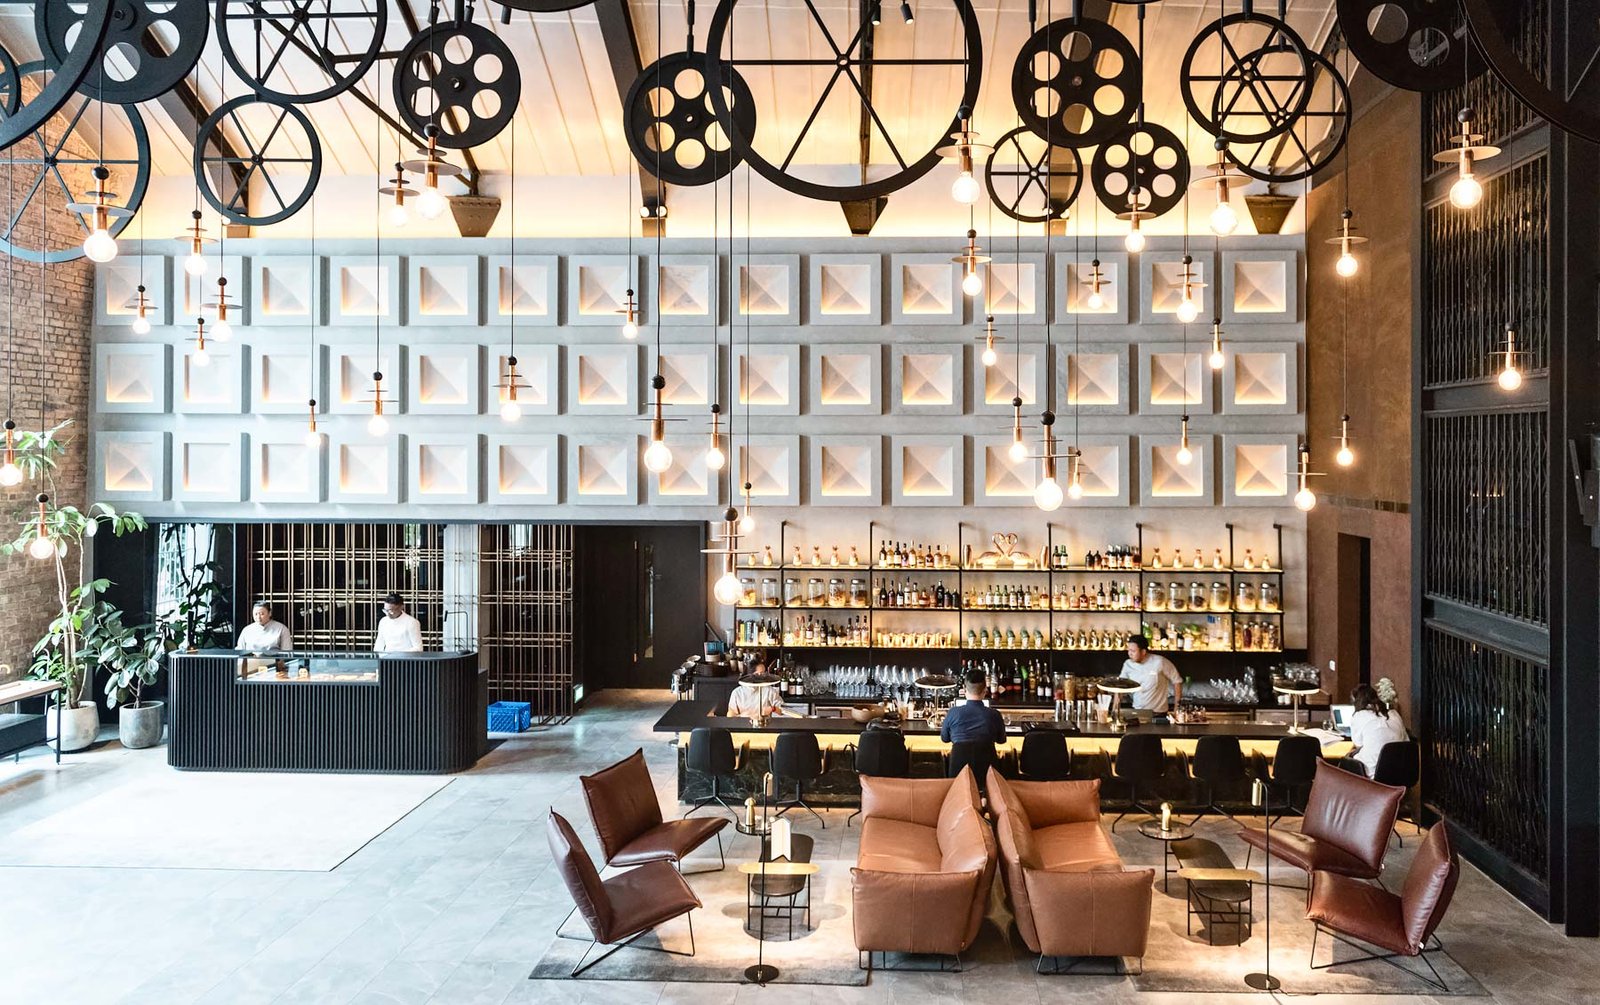 The Warehouse Hotel: Industrial Chic in Singapore